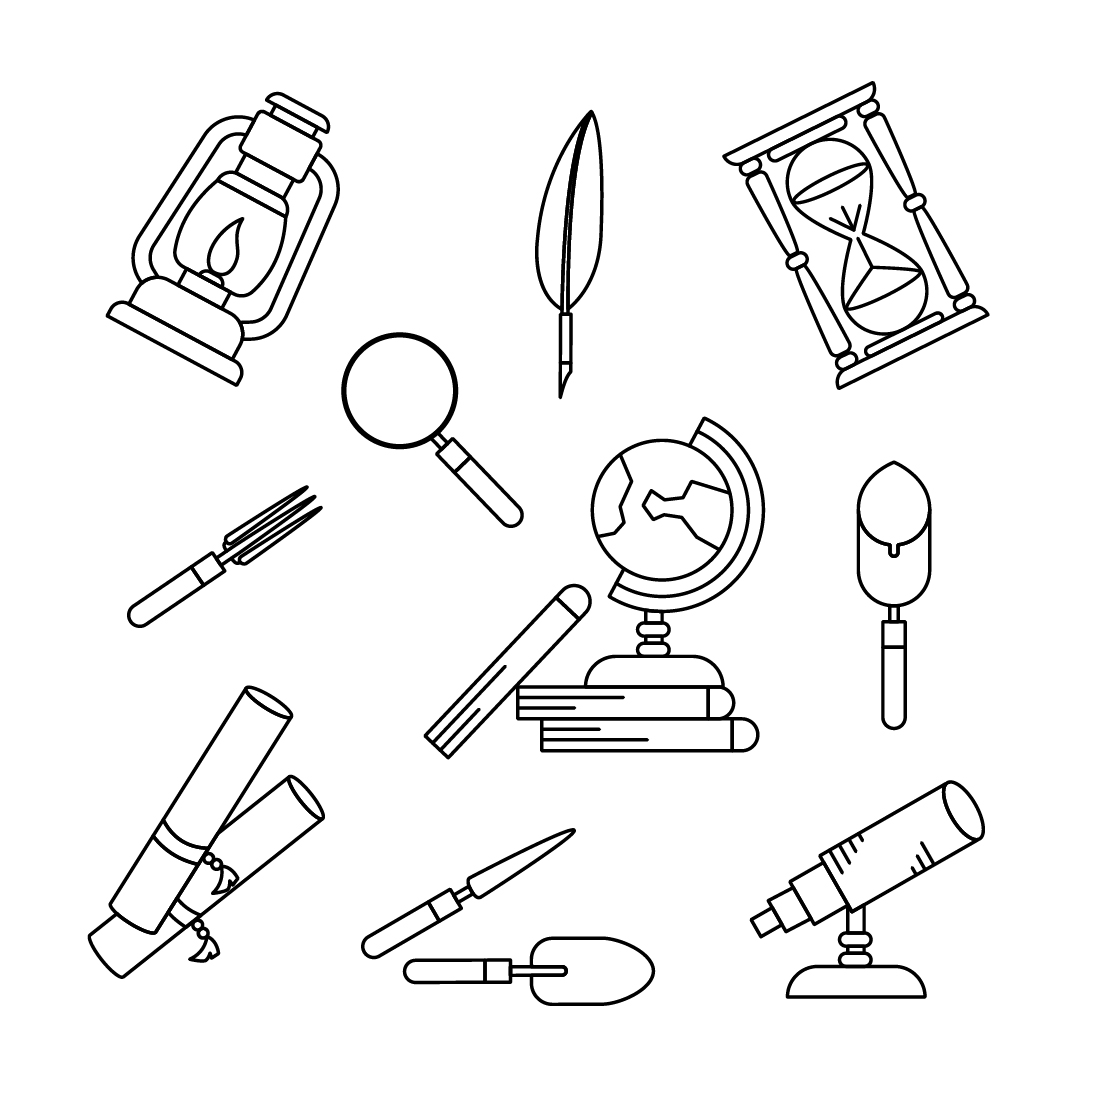 Black and white drawing of different items.